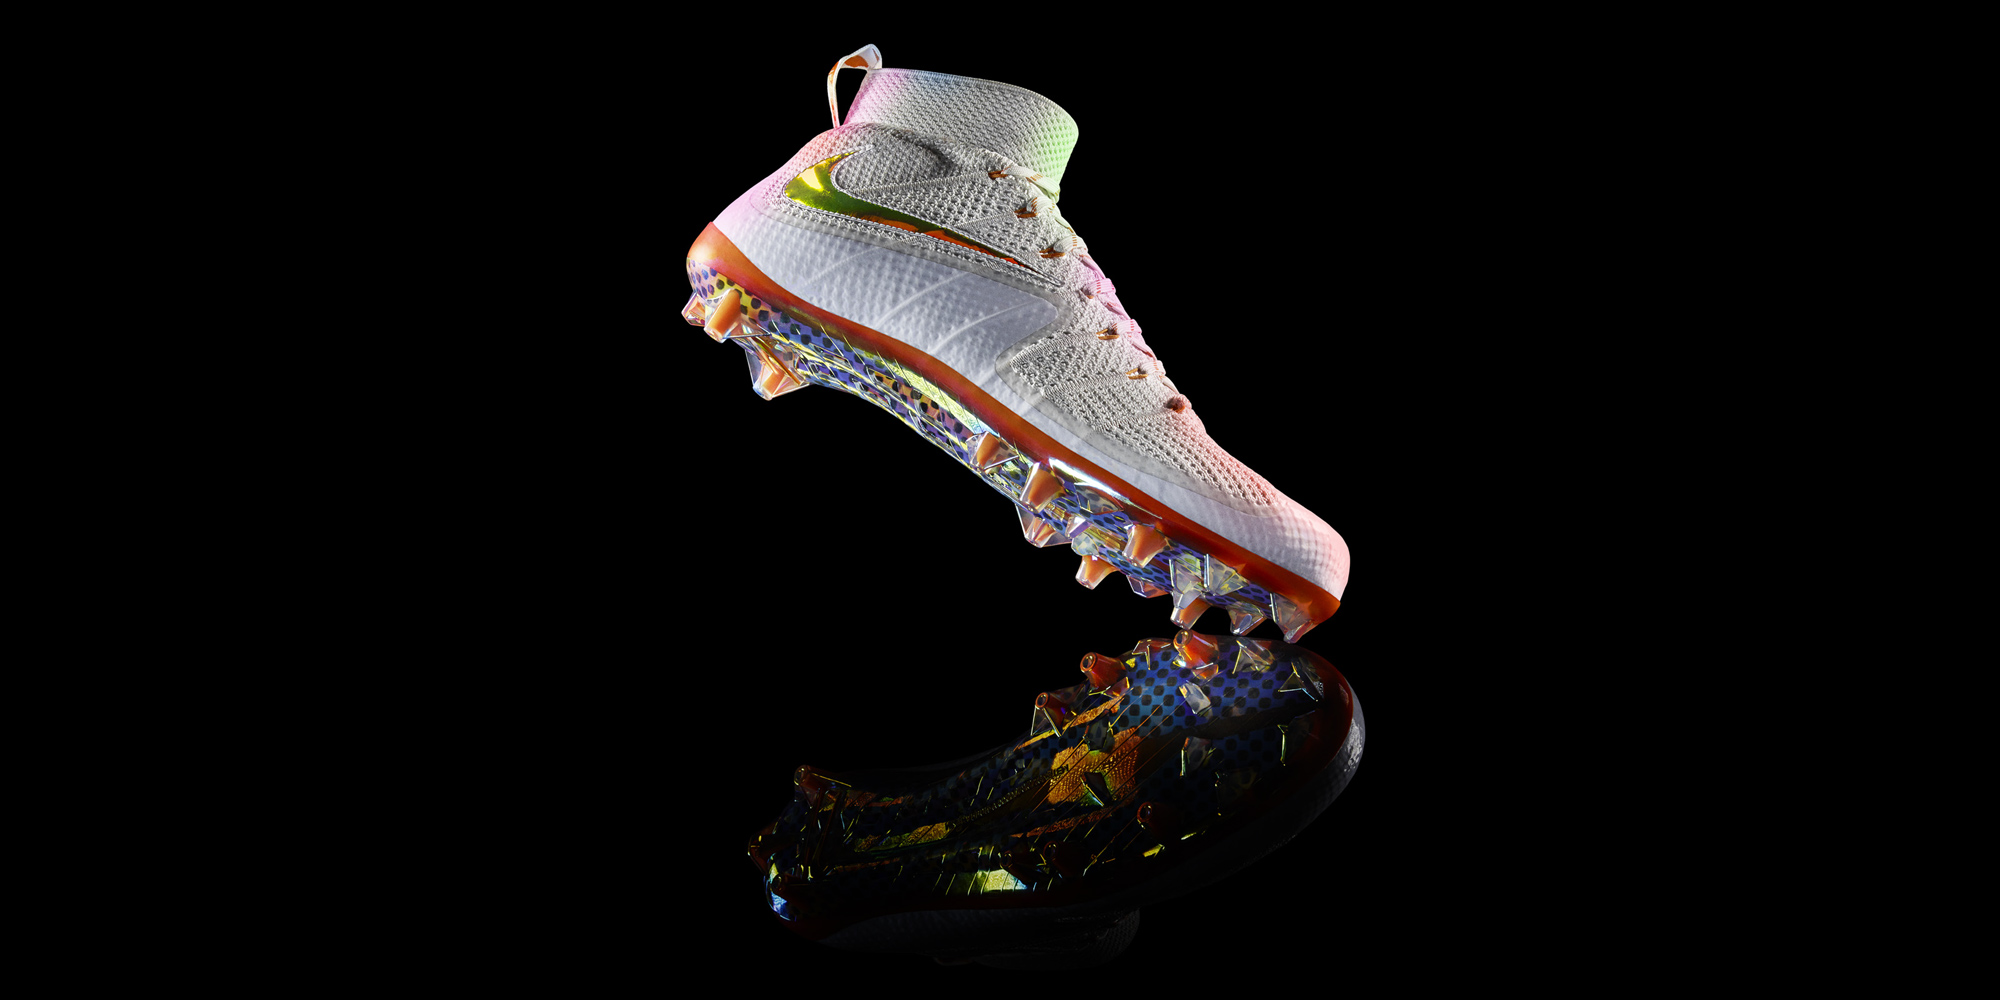 23+] Nike Football Shoes Wallpapers on 